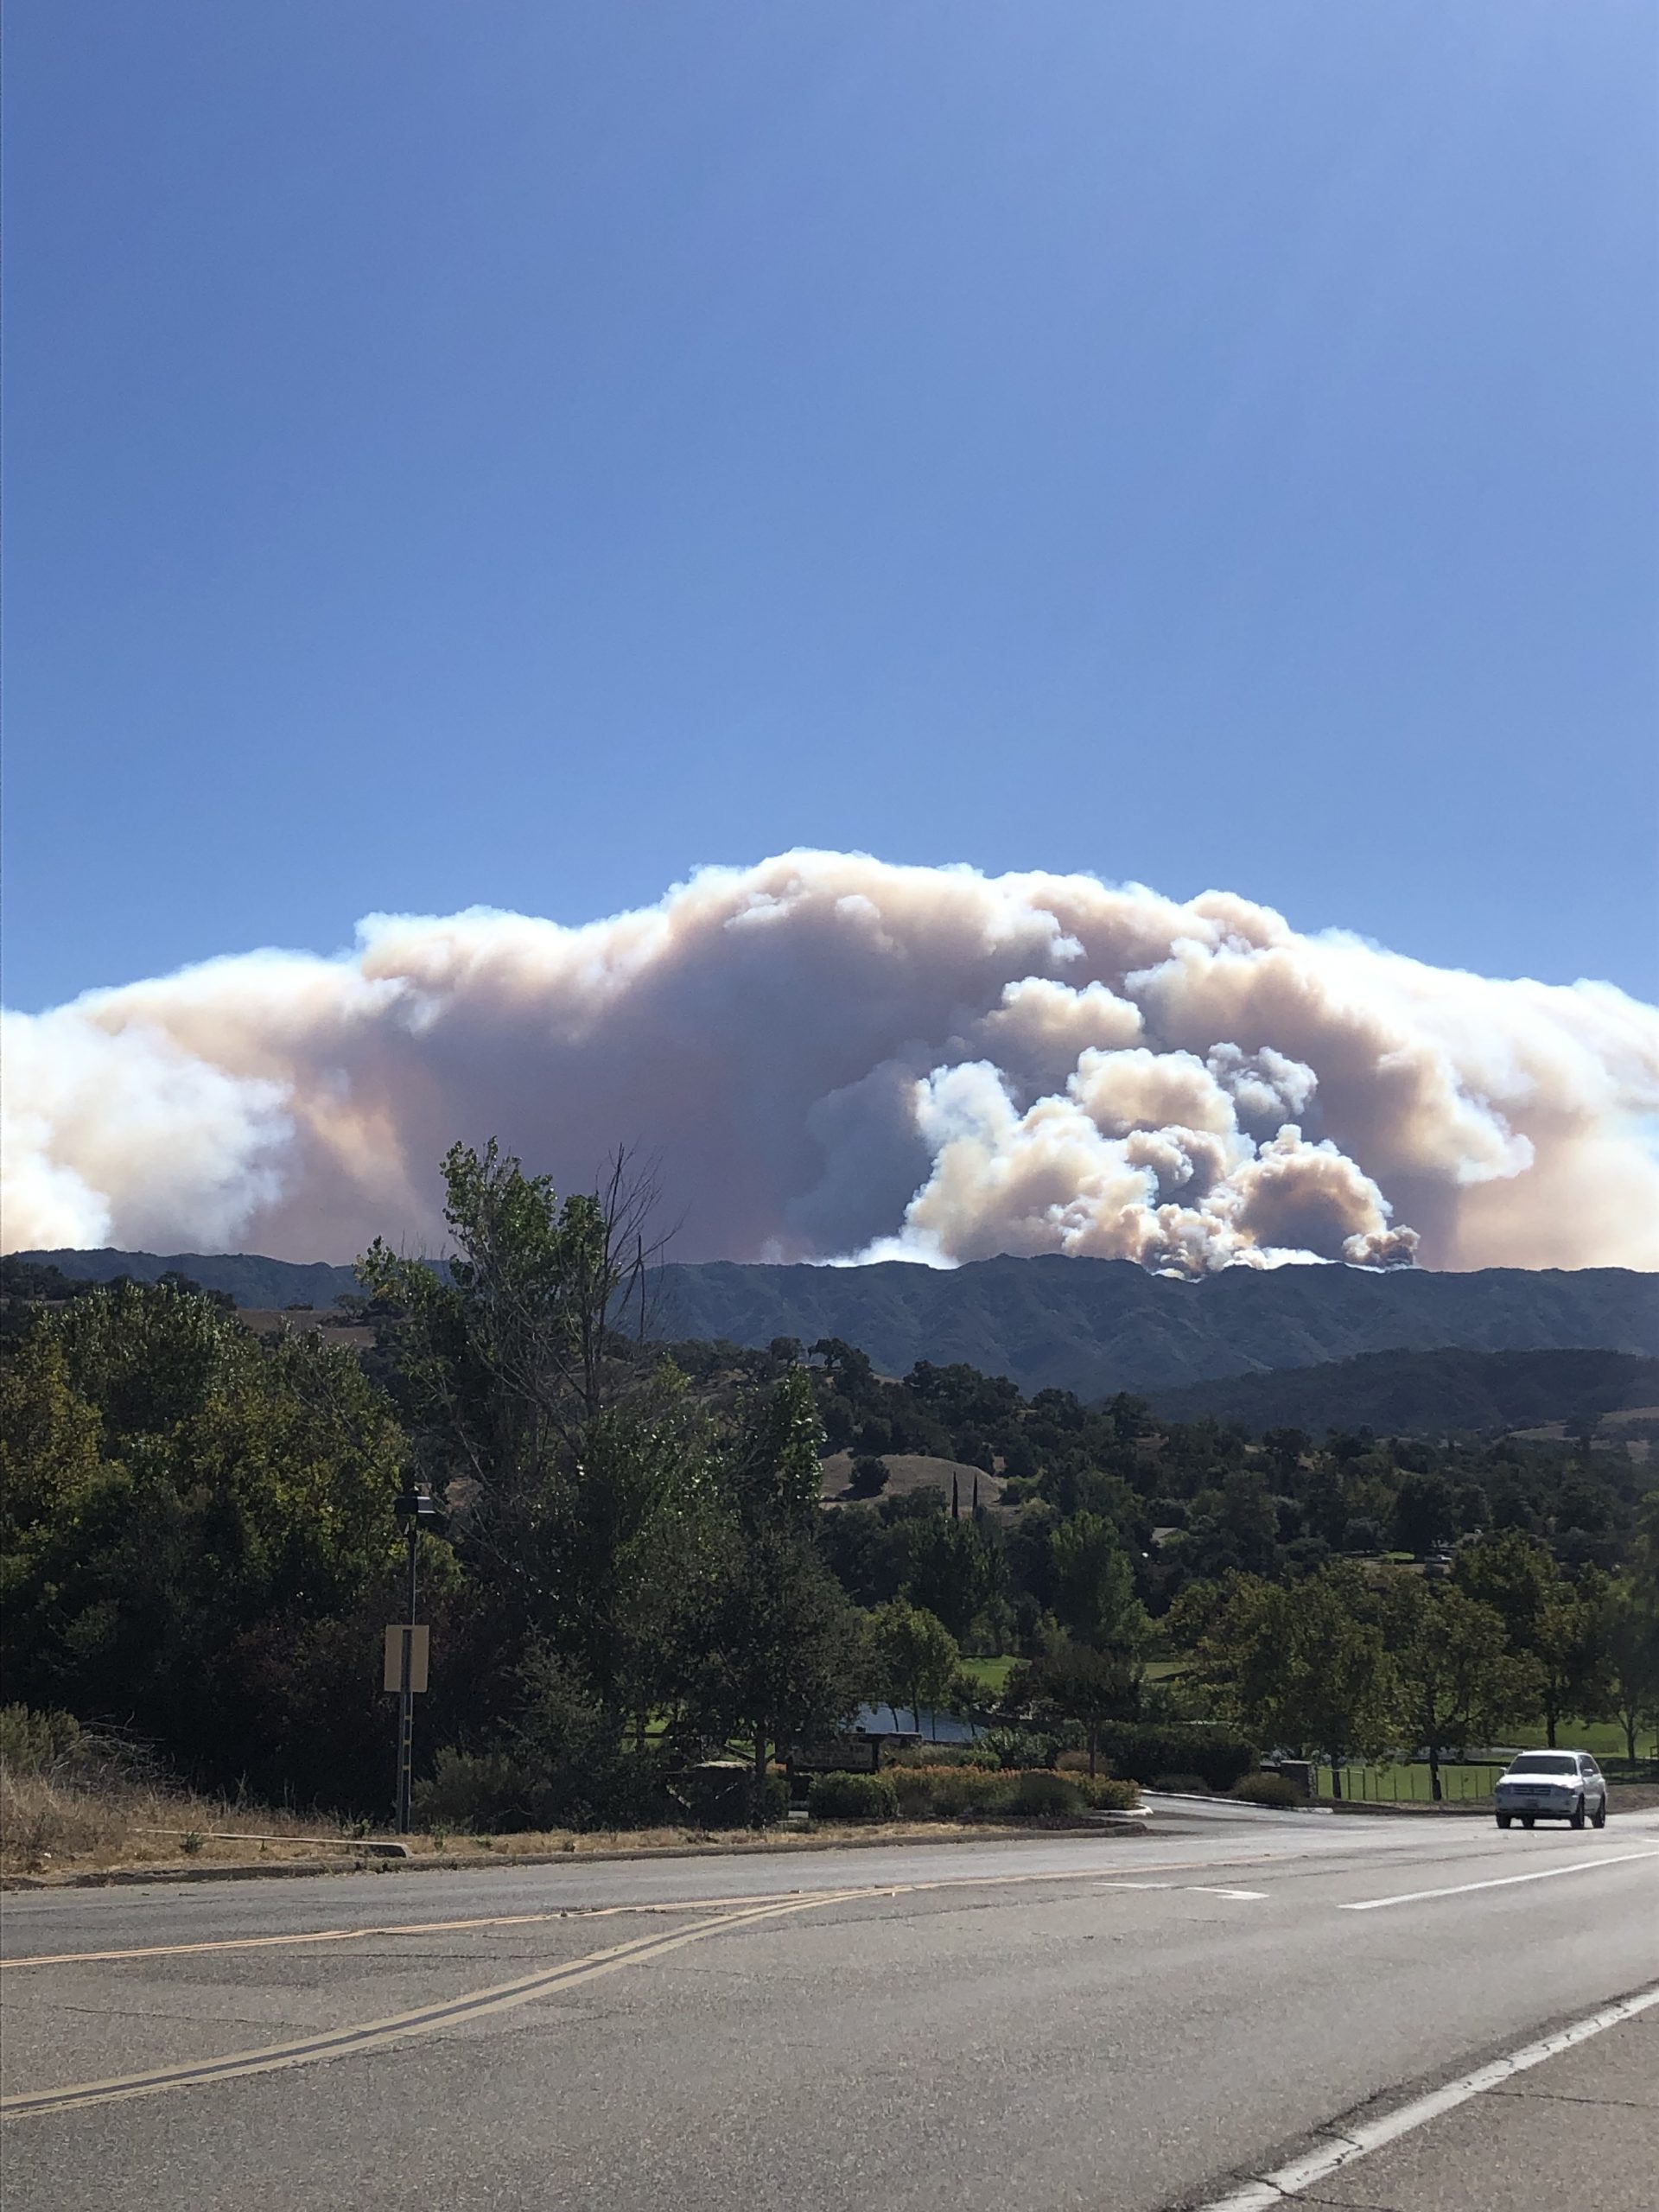 Alisal Fire crests 8,000 acres and growing due to dense underbrush